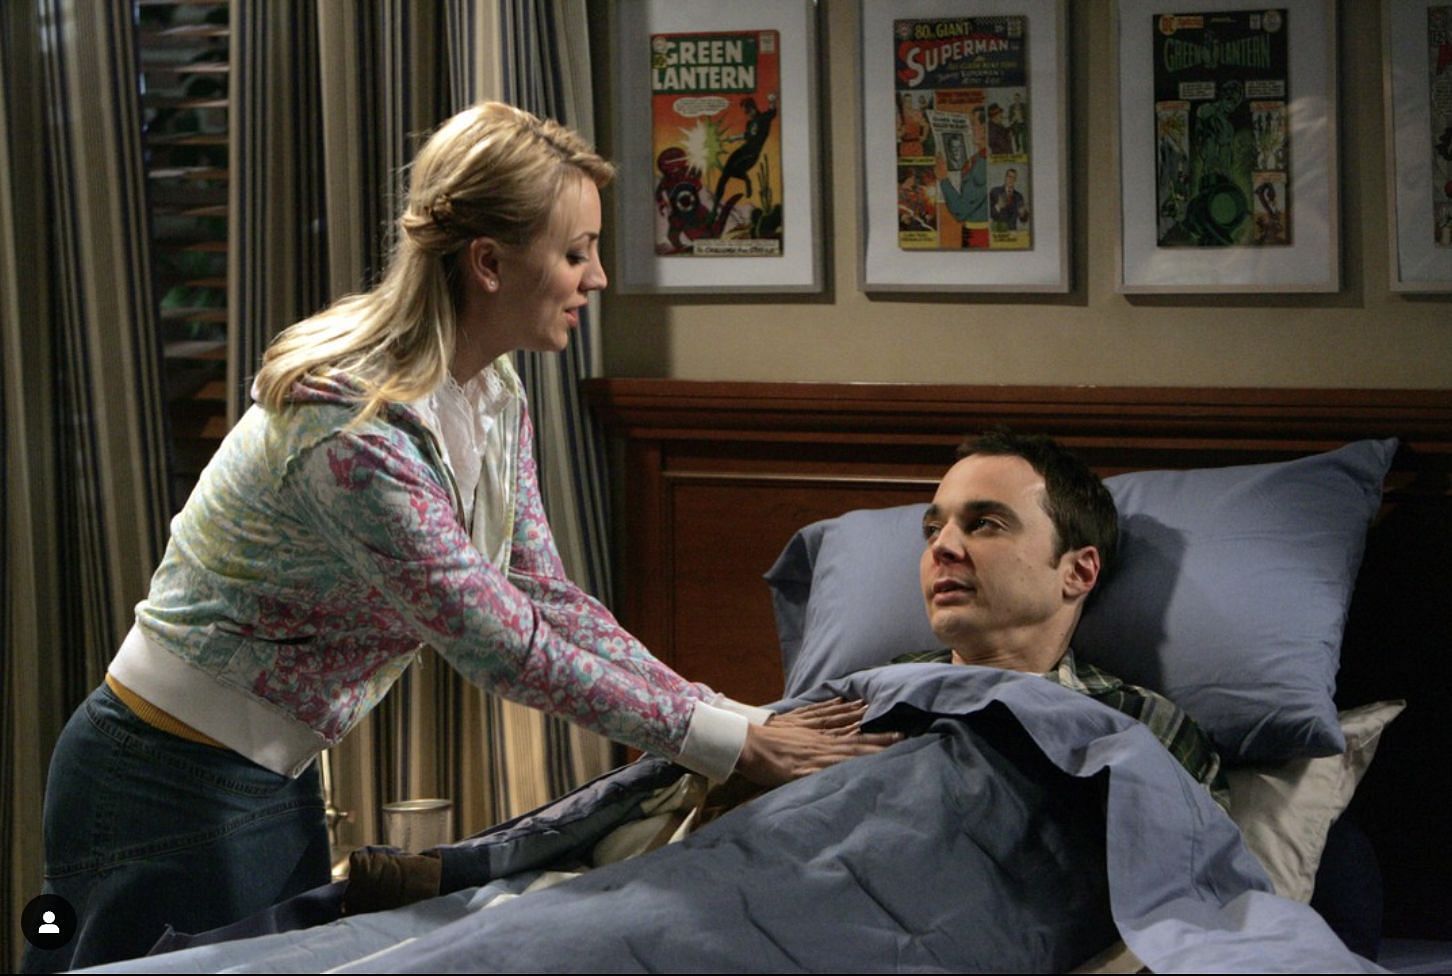 A still of Sheldon and Penny from The Big Bang Theory. (Image via Instagram/@bigbangtheory)